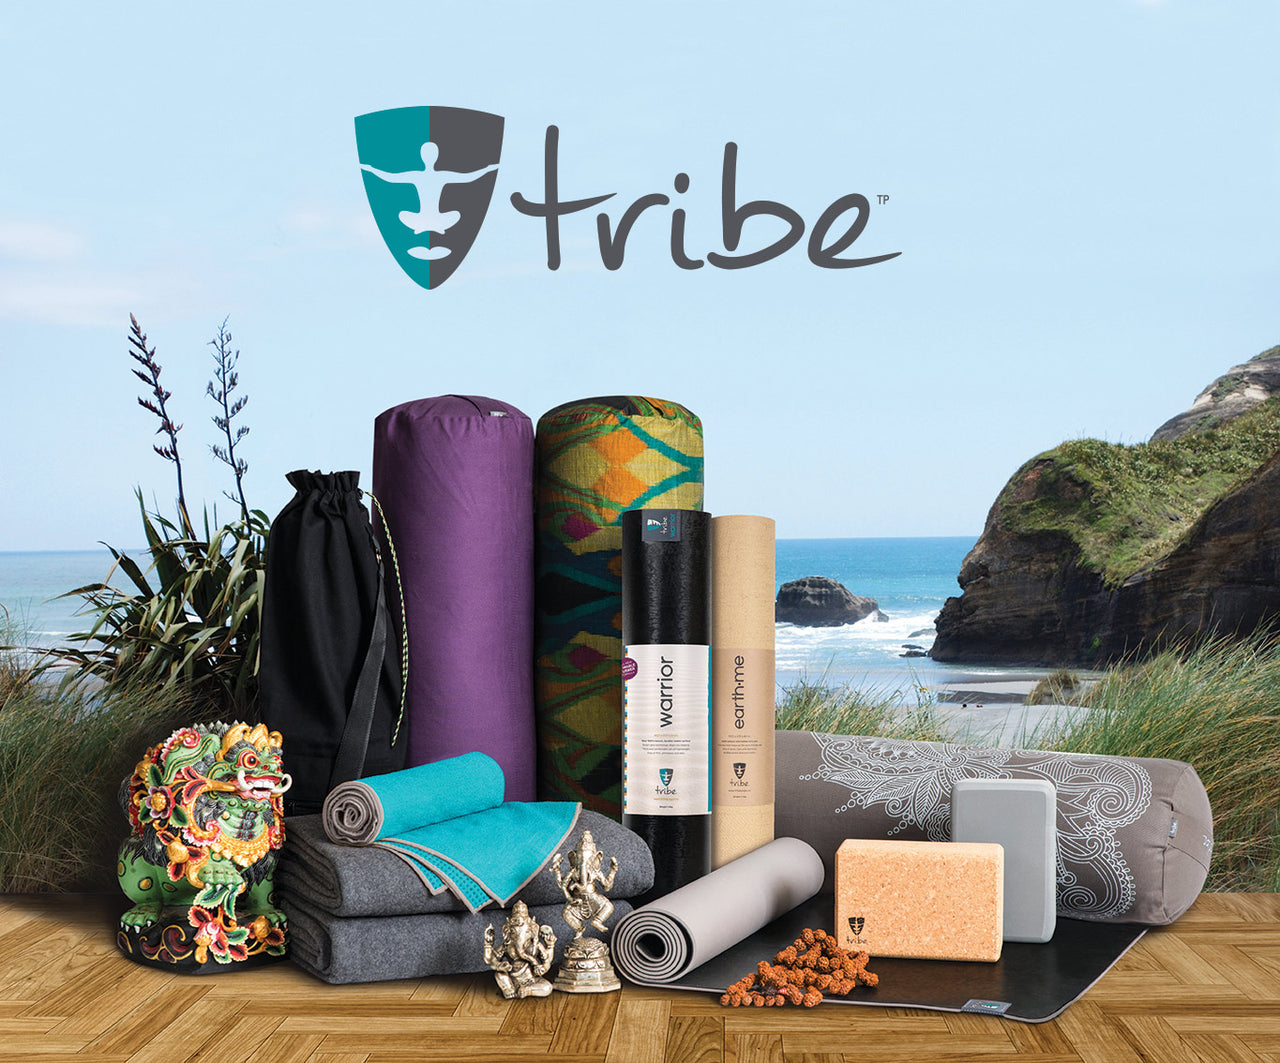 TRIBE's Eco Friendly, Sustainable and Ethical Yoga & Wellbeing Products | TRIBE Yoga